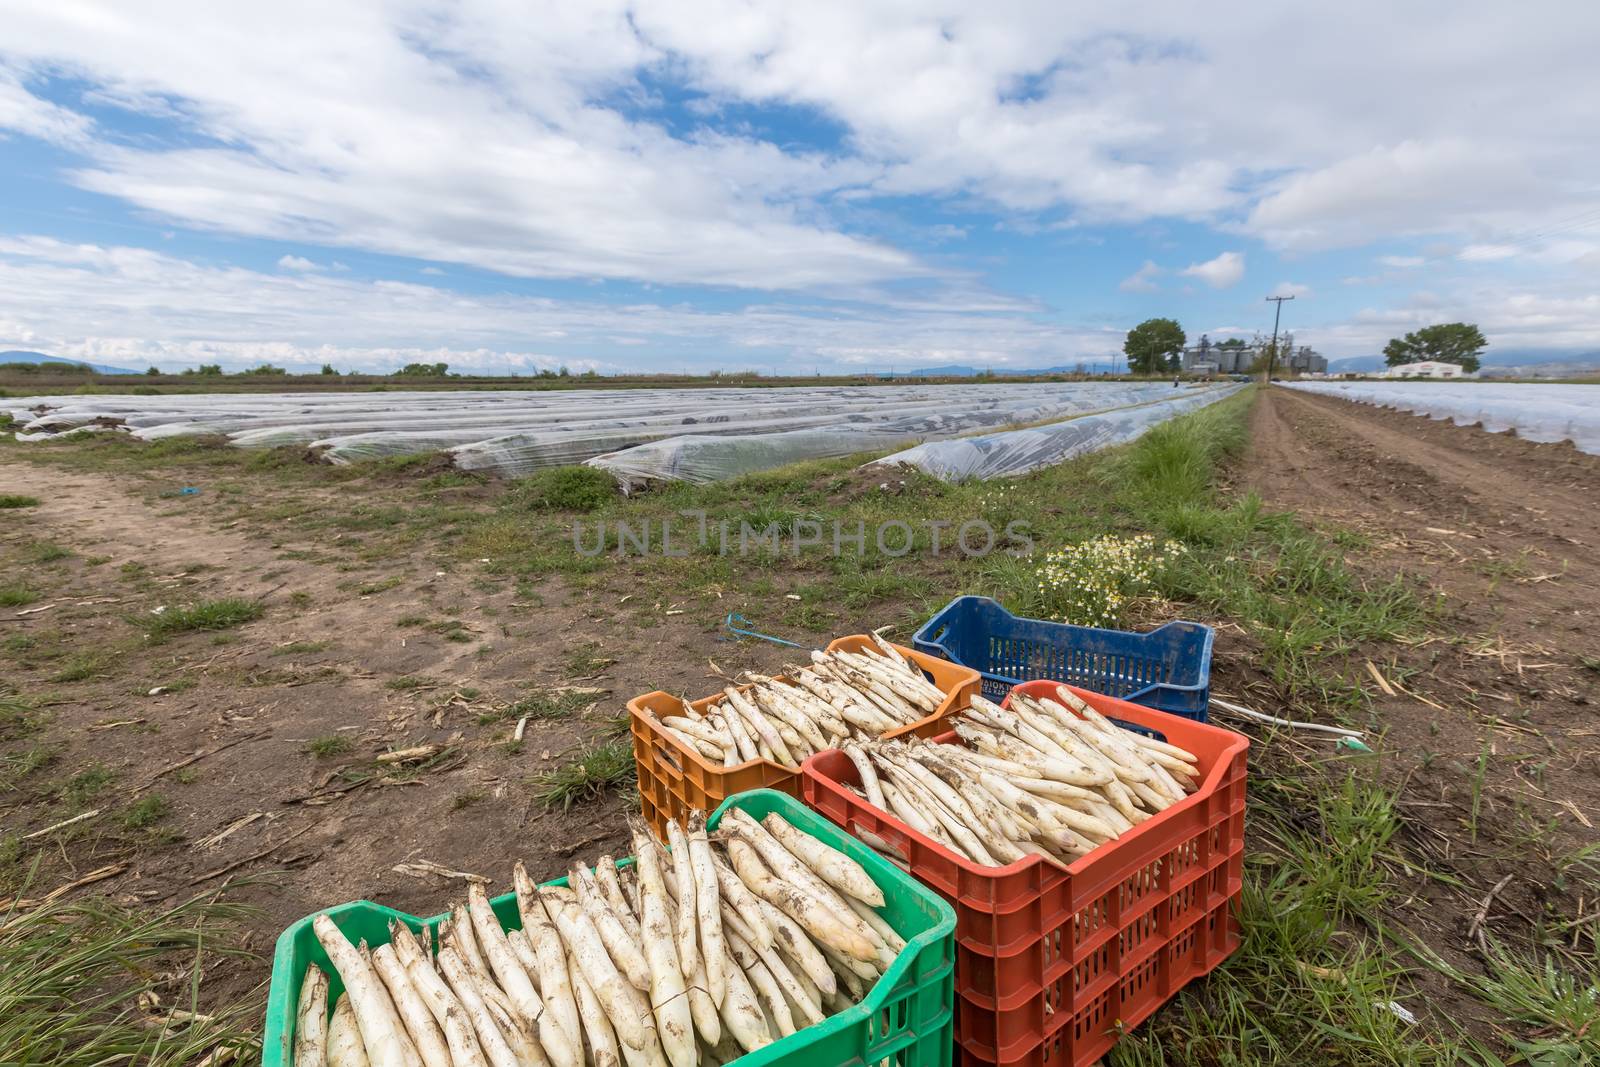 harvest white asparagus from the field